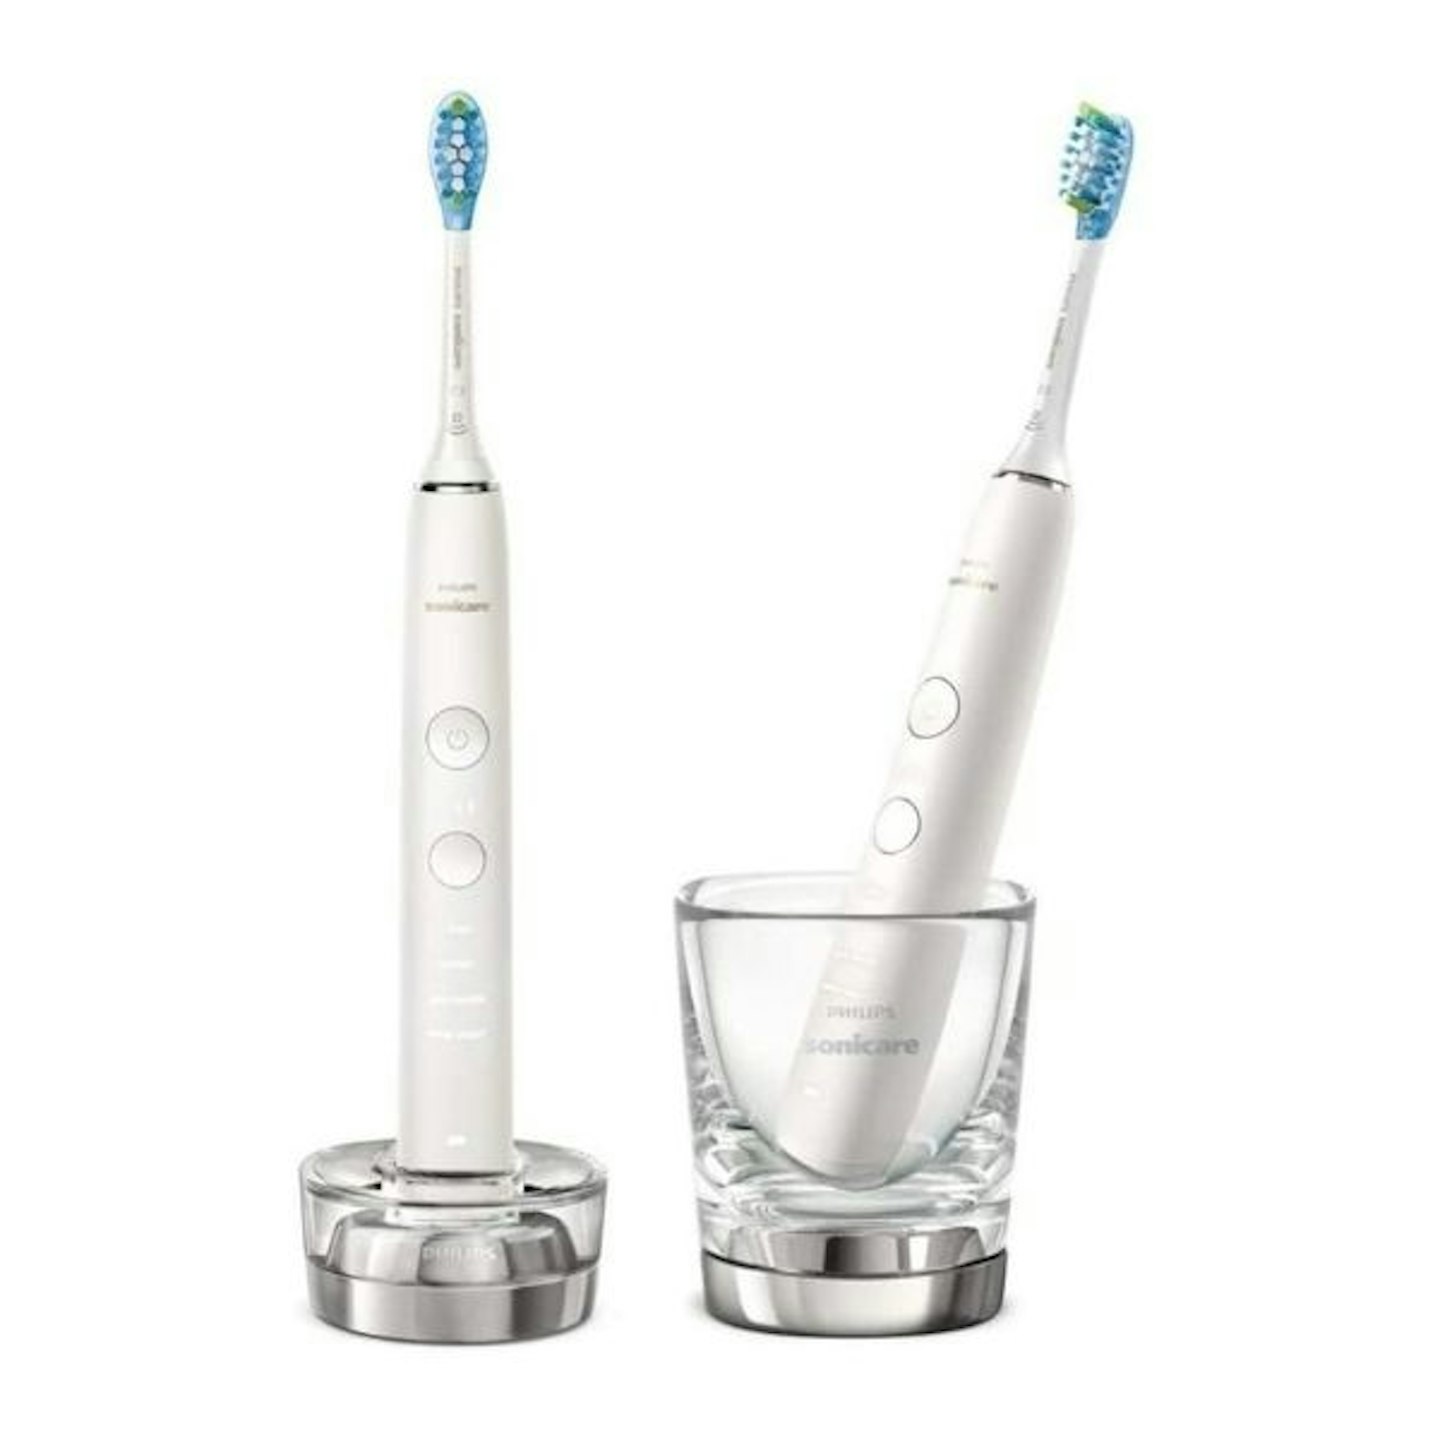 Philips Sonicare DiamondClean 9000 Set of 2 White Electric Toothbrushes,